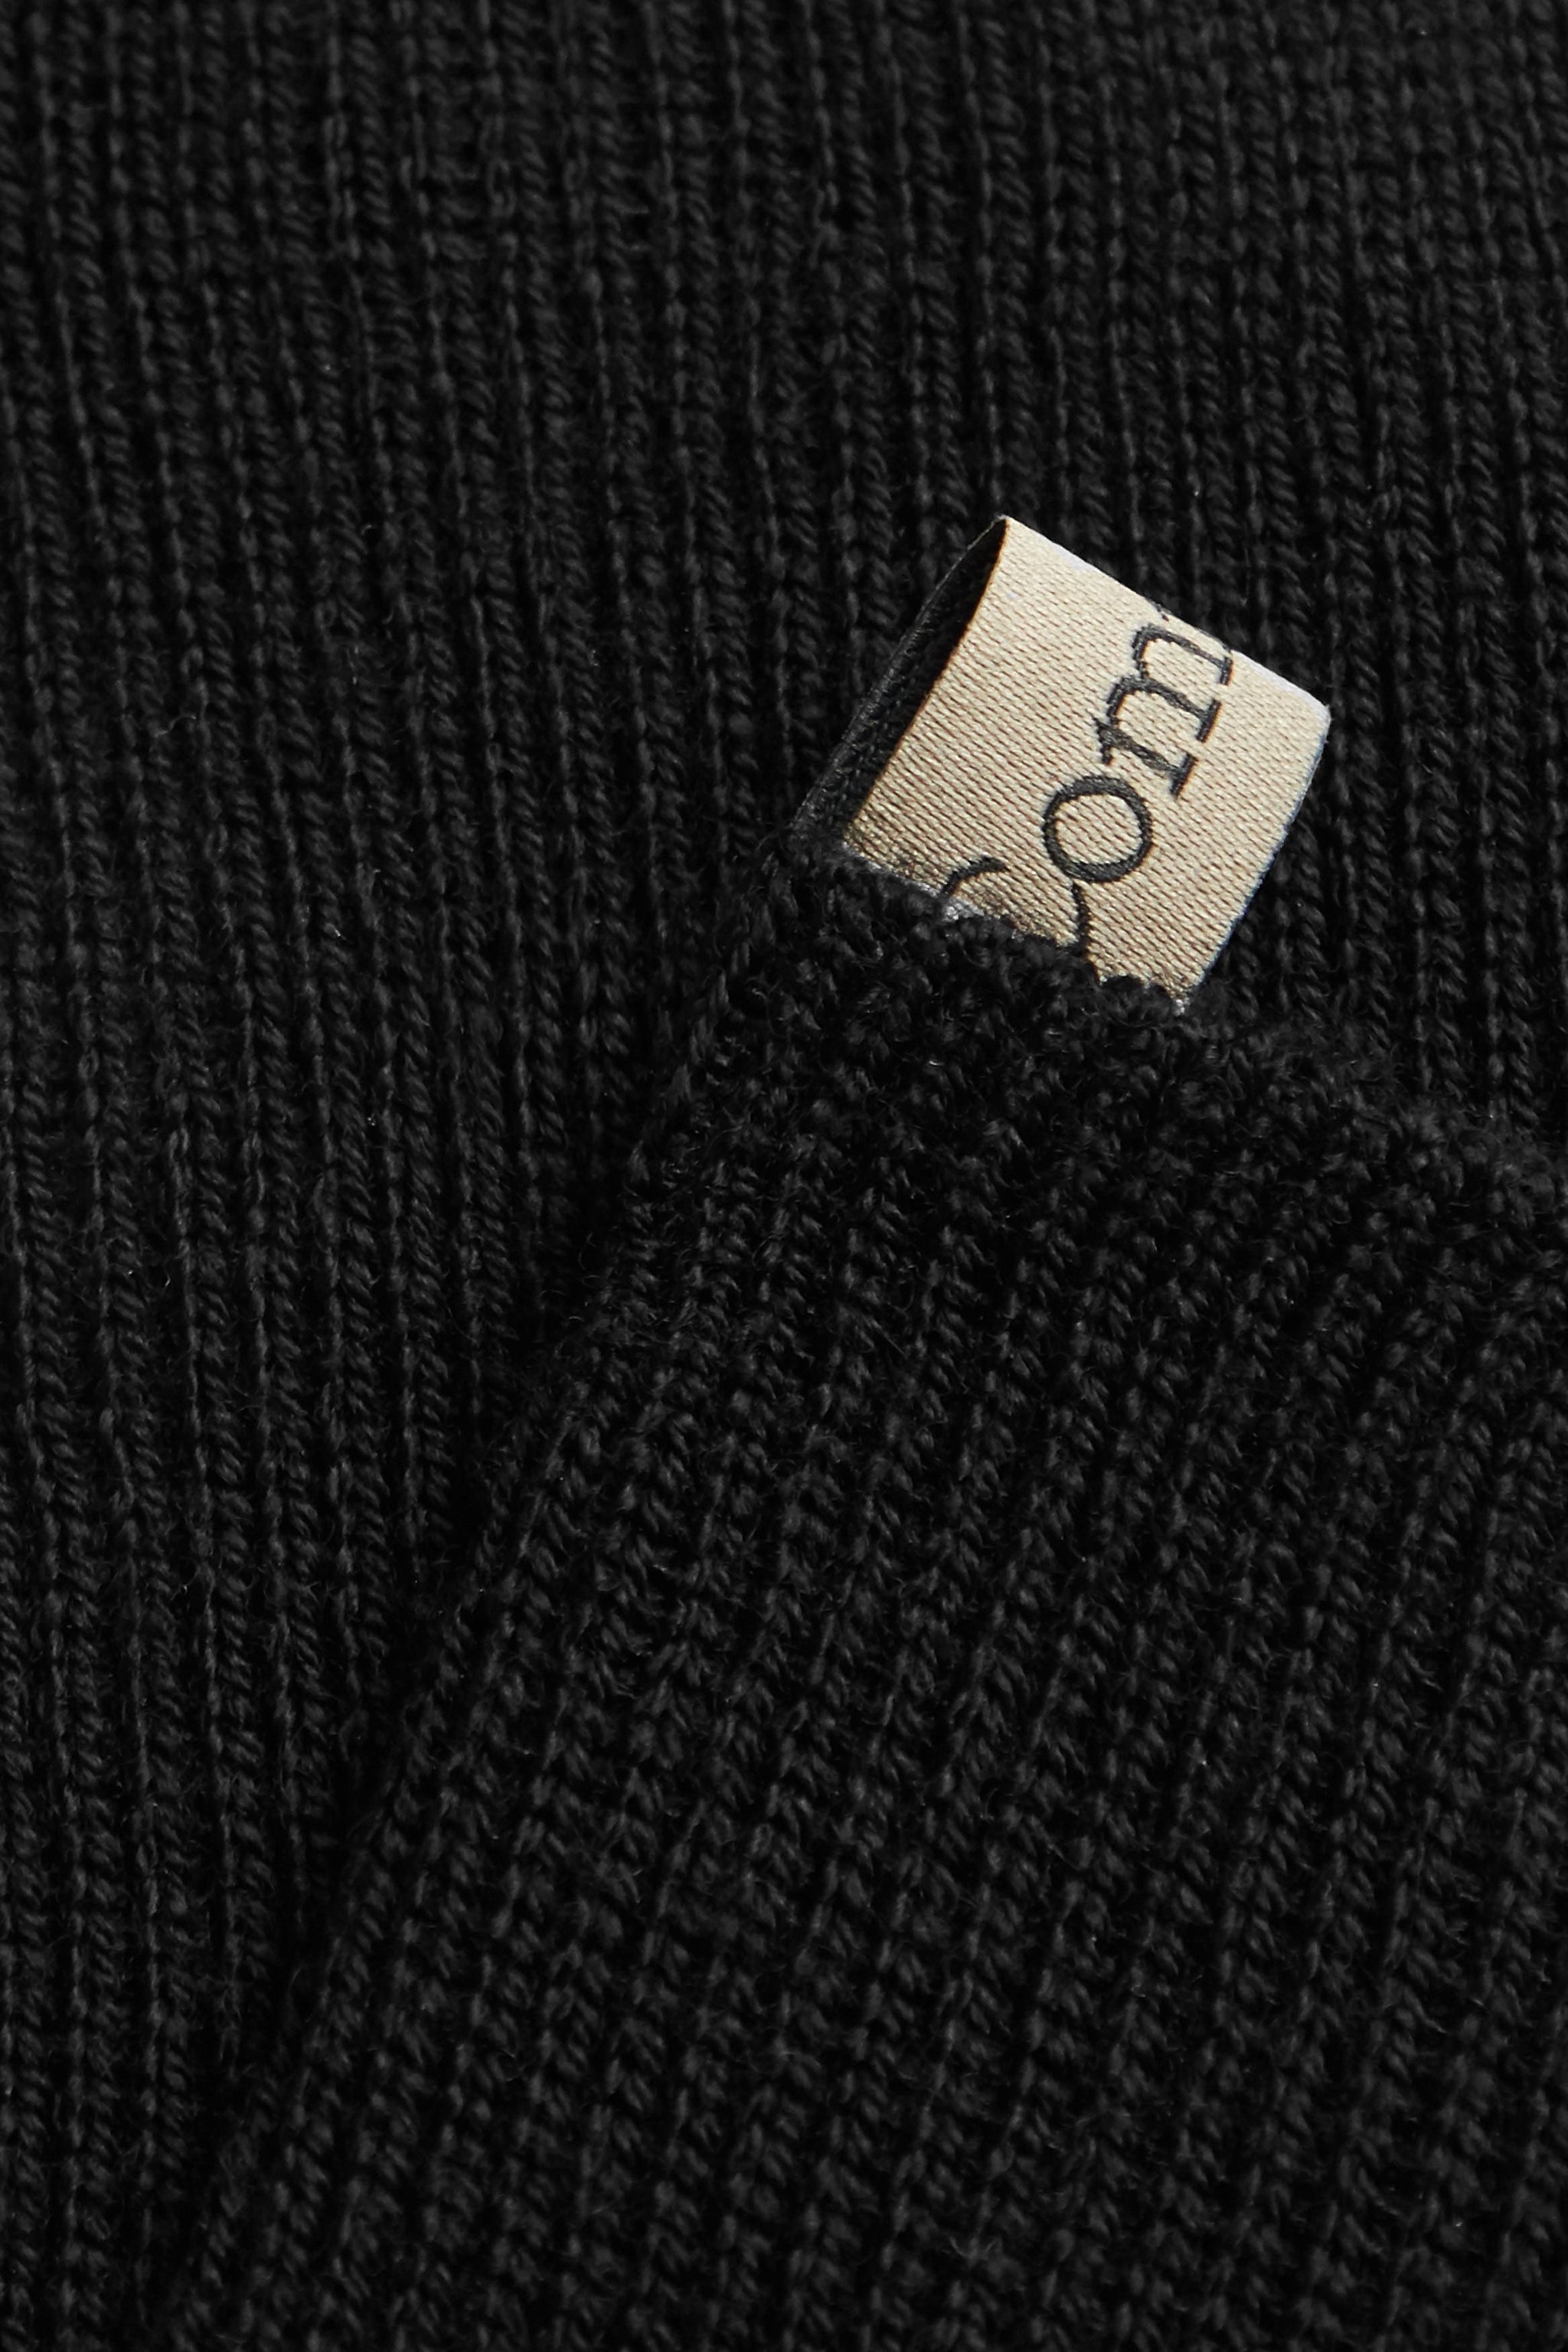 Ribbon tag detail, The Merino Sock in Black, merino wool, by Comme Si